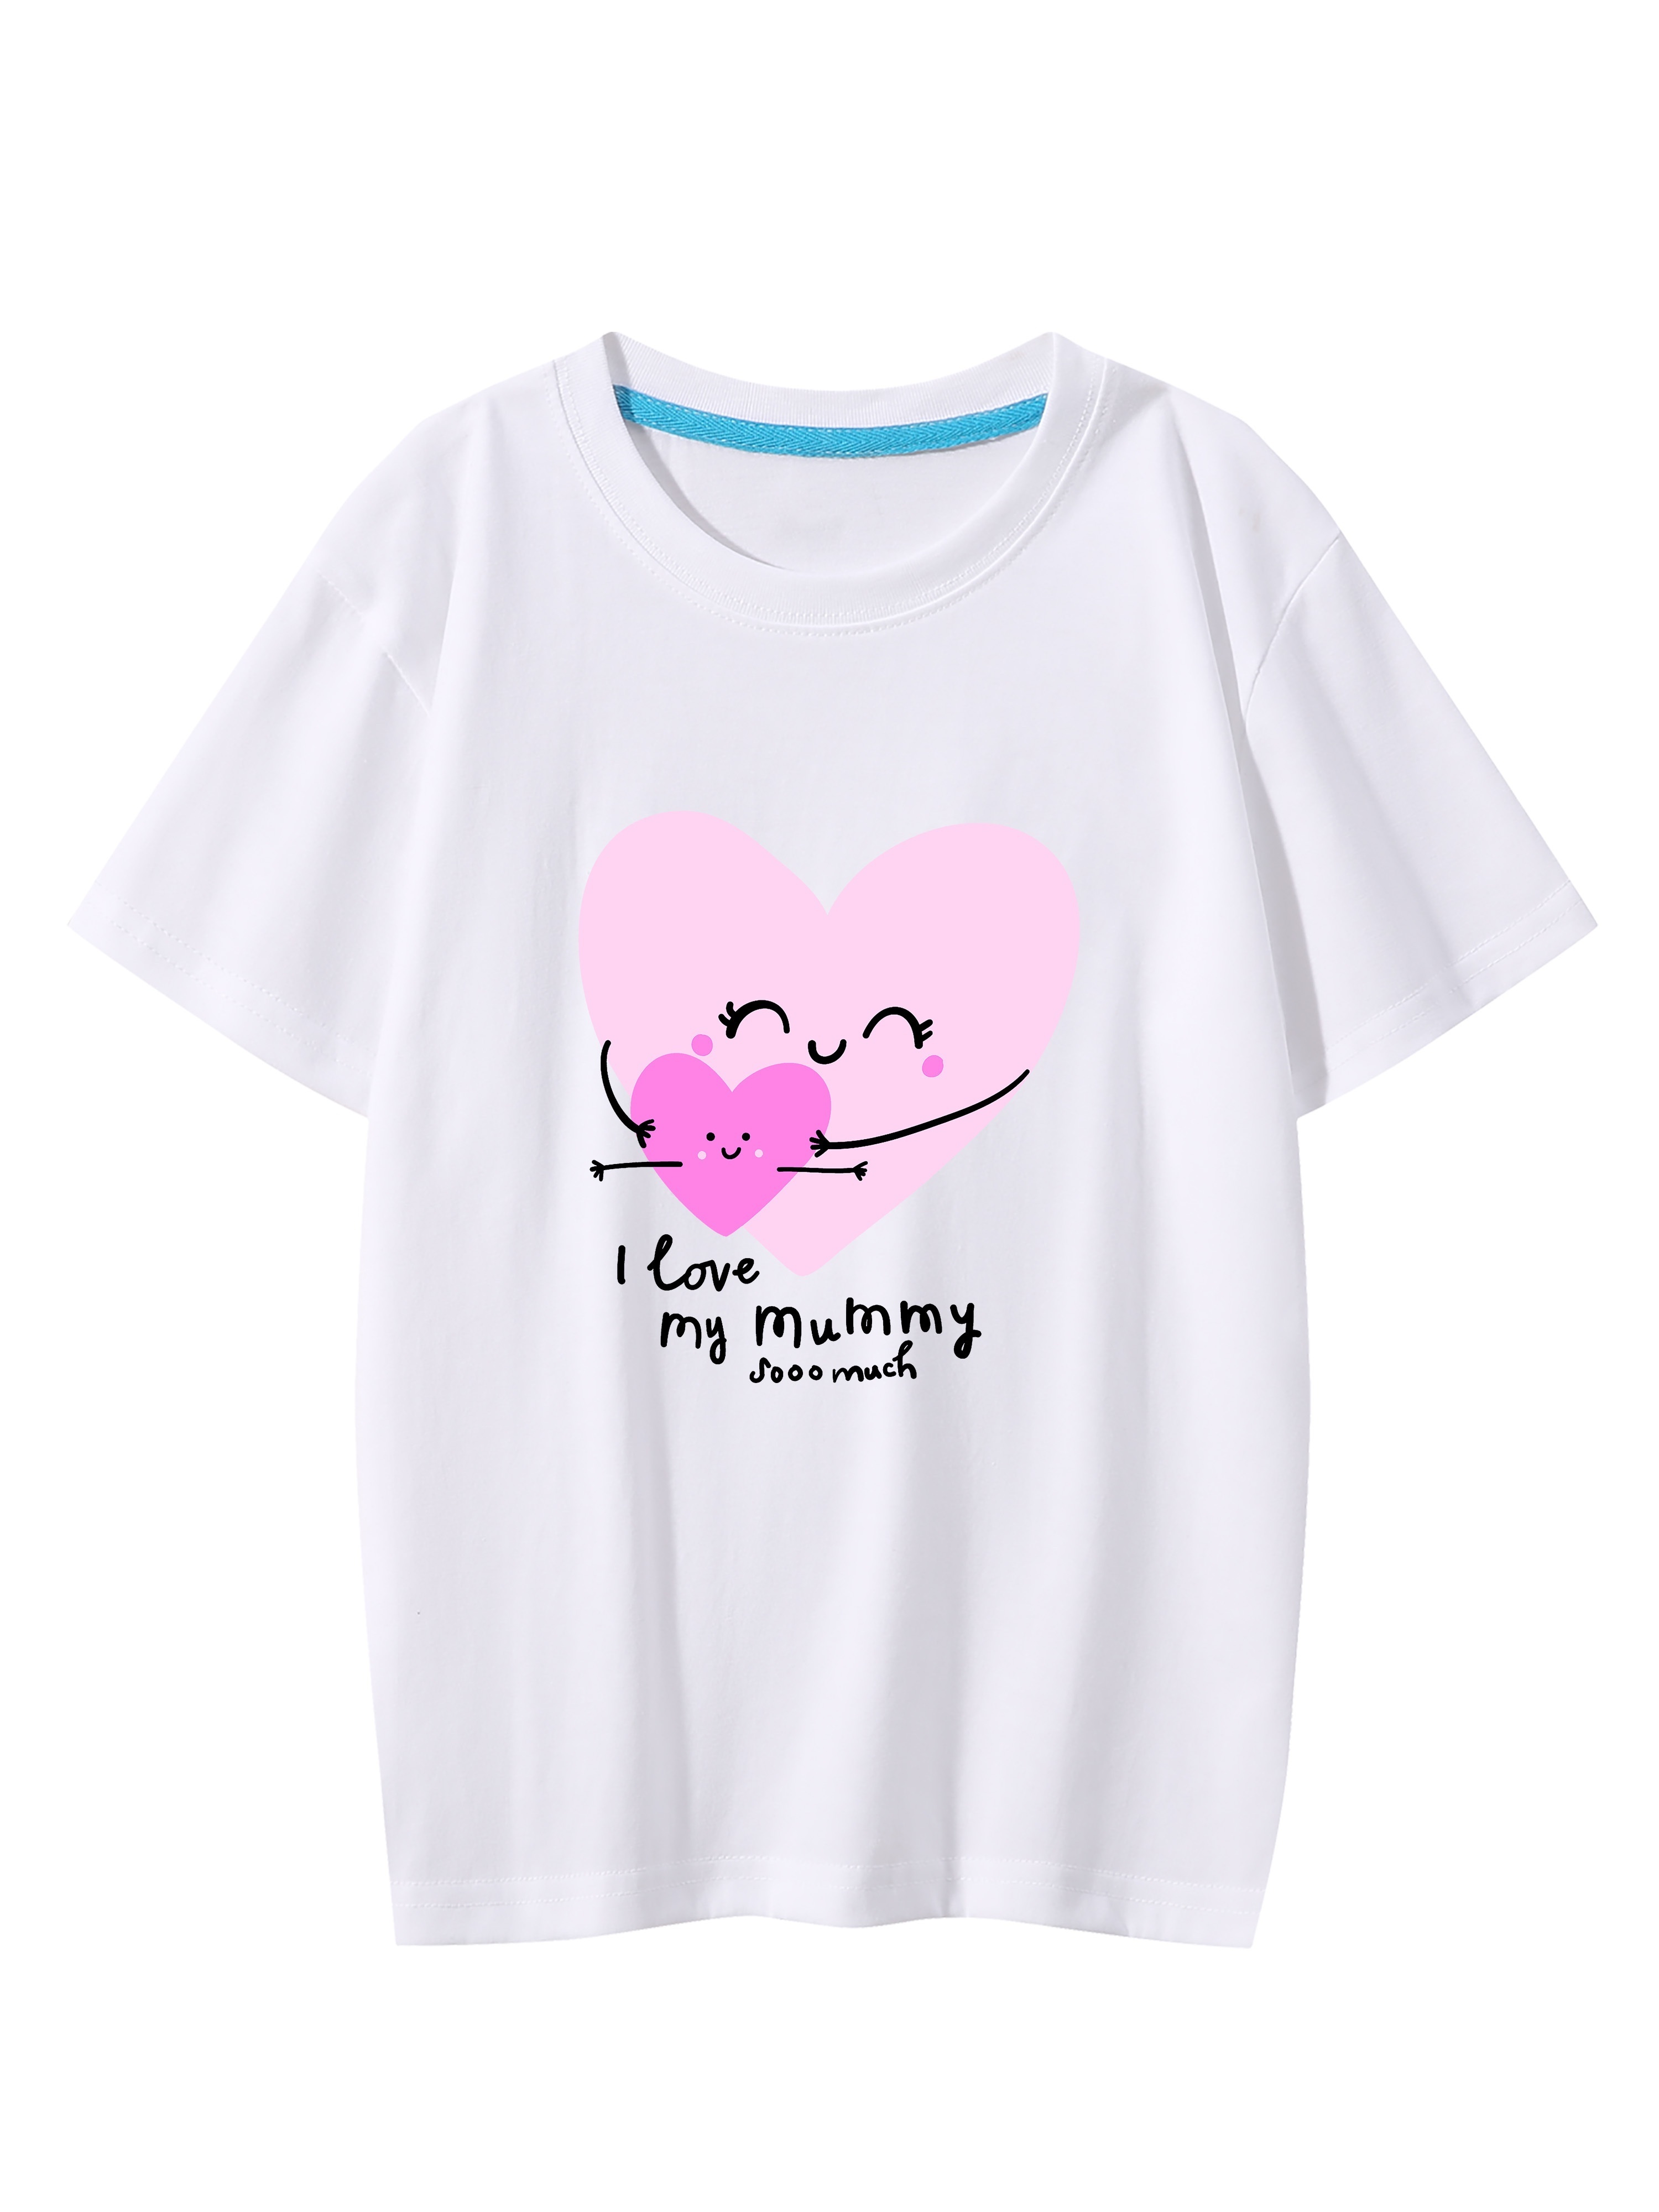 Lots Of Love By Speechless Girls Clothing in Kids Clothing